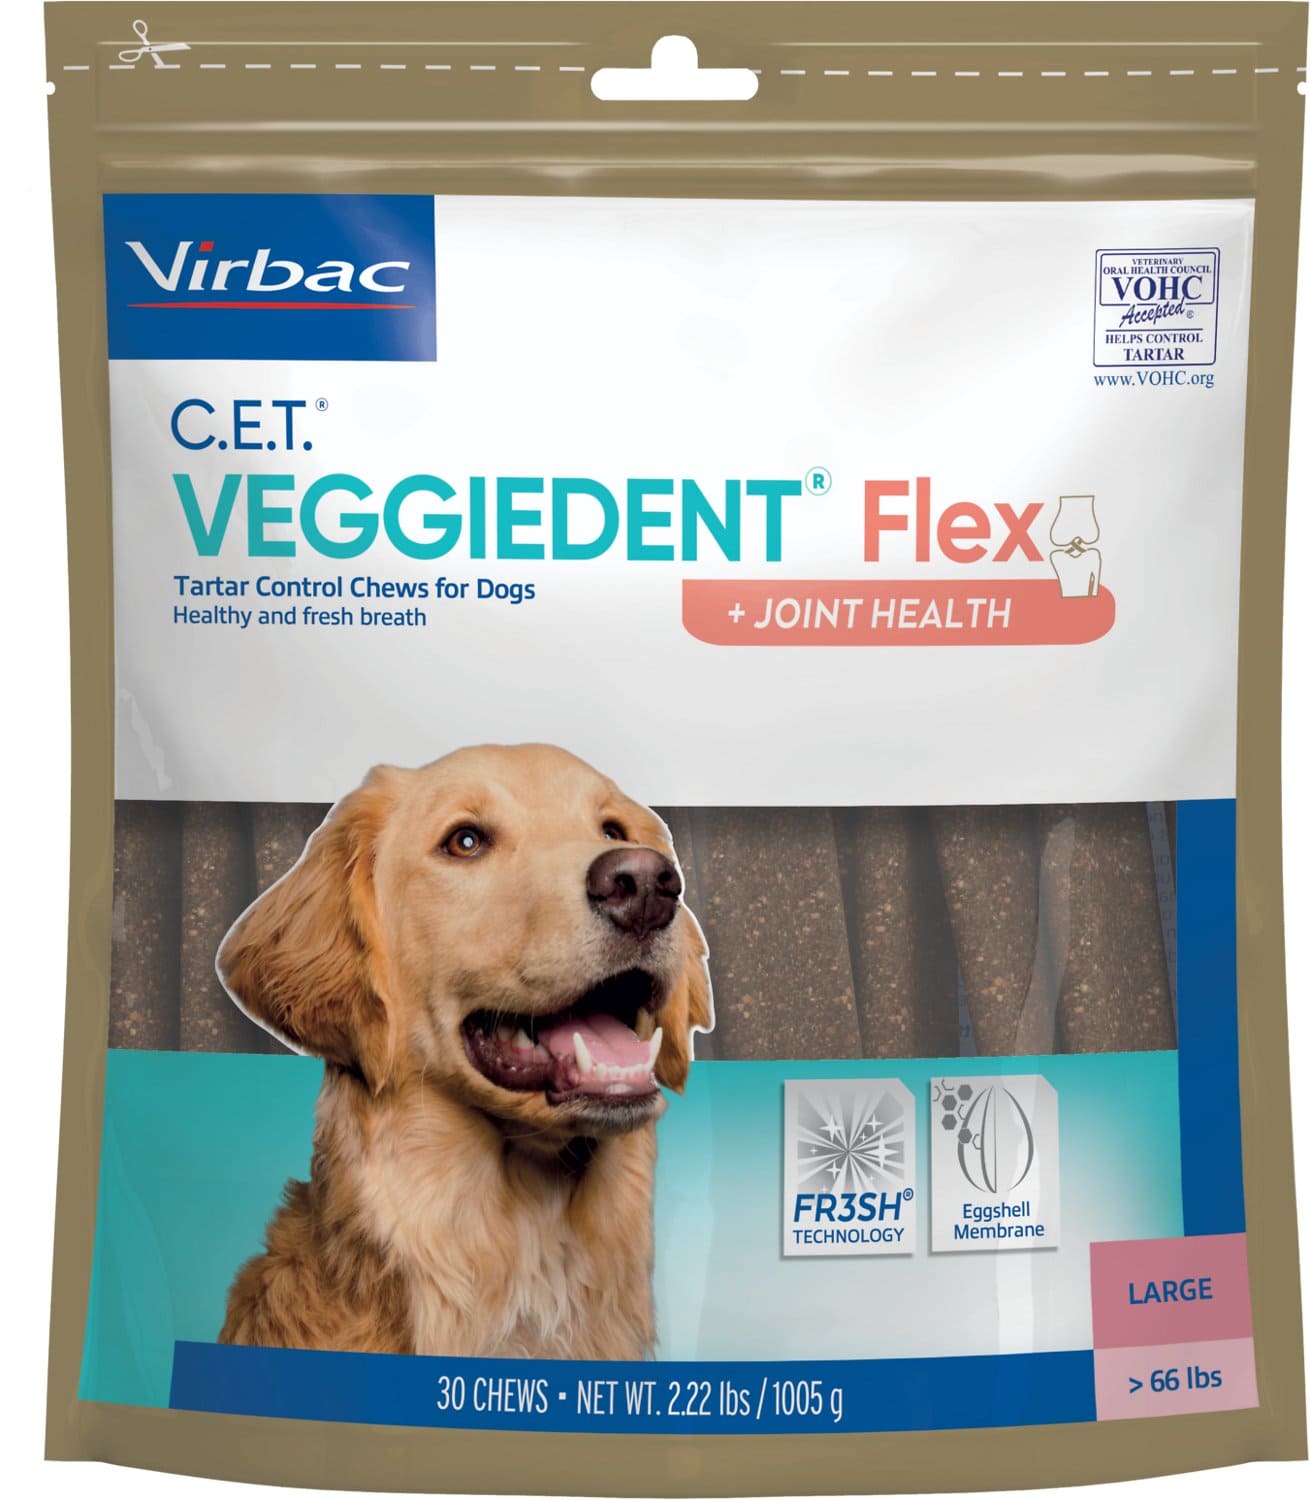 C.E.T. VeggieDent Flex + Joint Health for large dogs over 66 lbs 30 chews 1